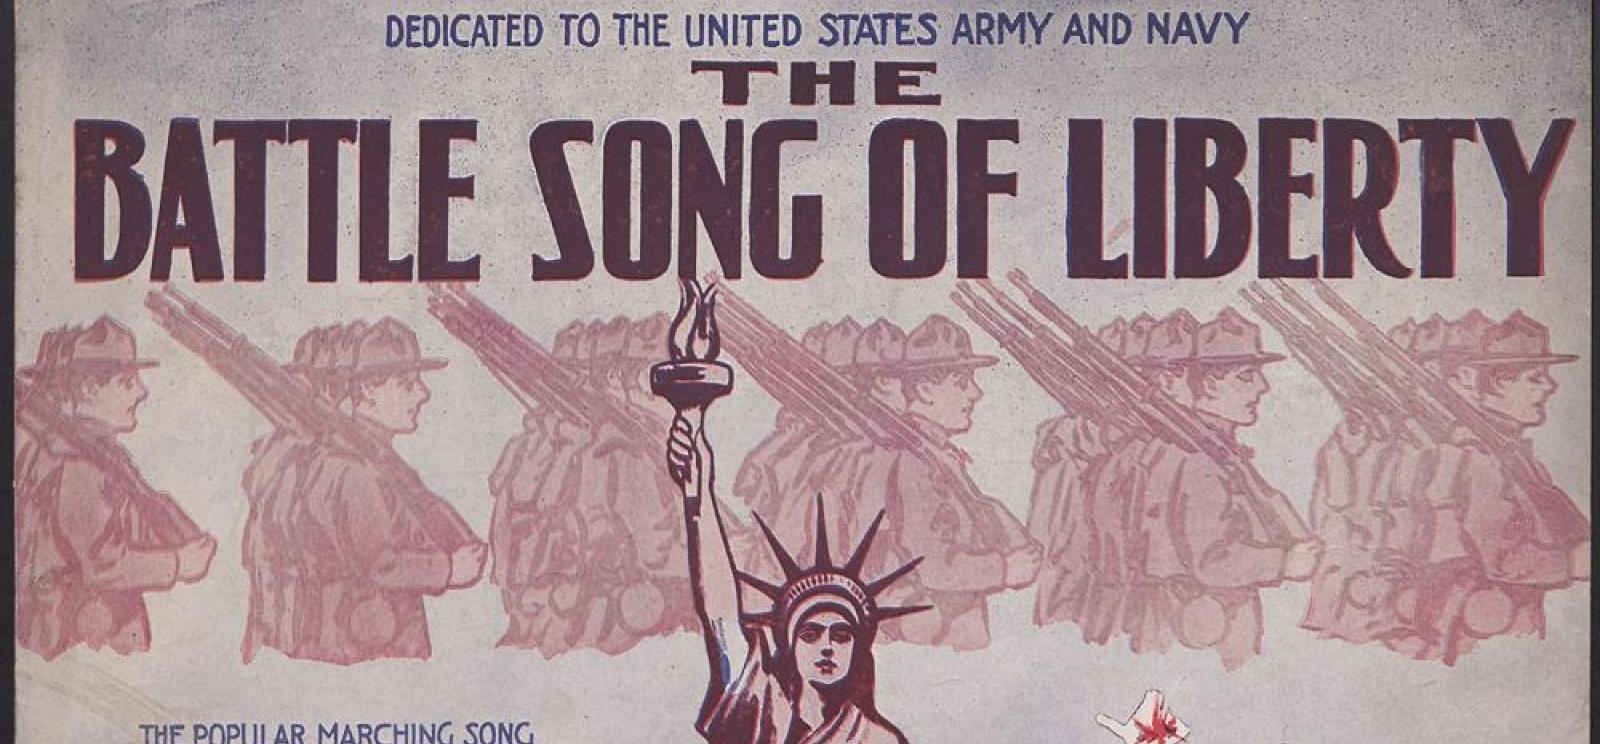 Scan of the cover for the sheet music of a song titled 'Battle Song of Liberty'. Image: Ghostly soldiers marching left to right in the background with the Statue of Liberty in the foreground.